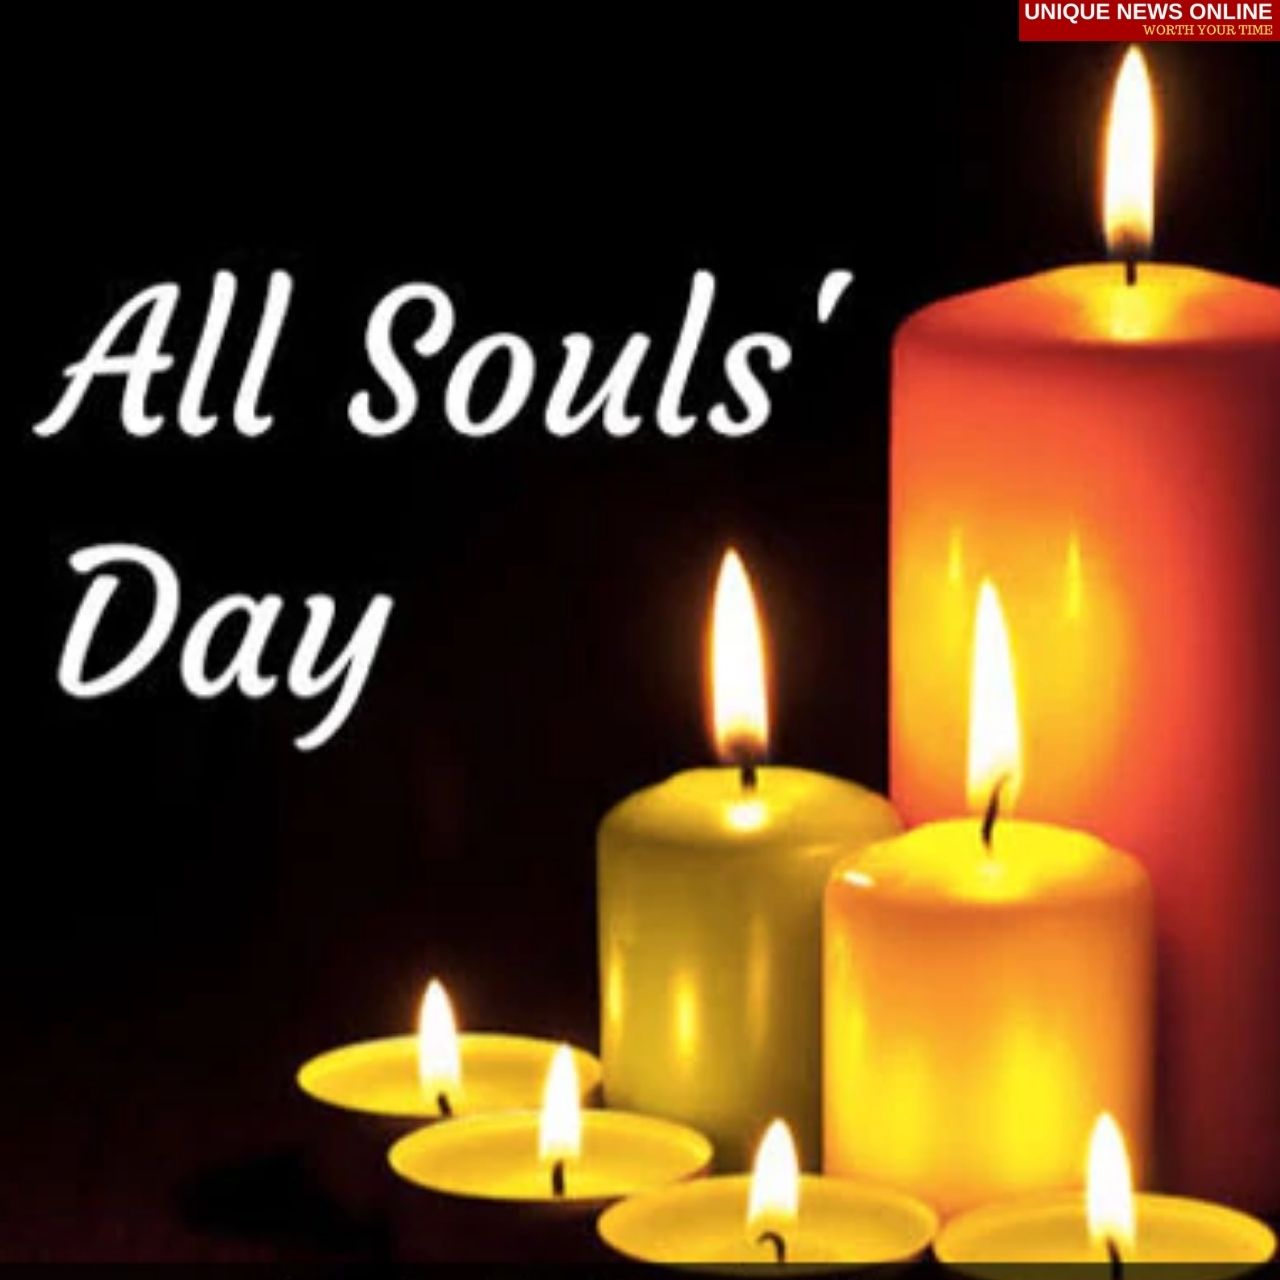 All Souls' Day 2021 Wishes, Greetings, Messages, HD Images, and Quotes to Share